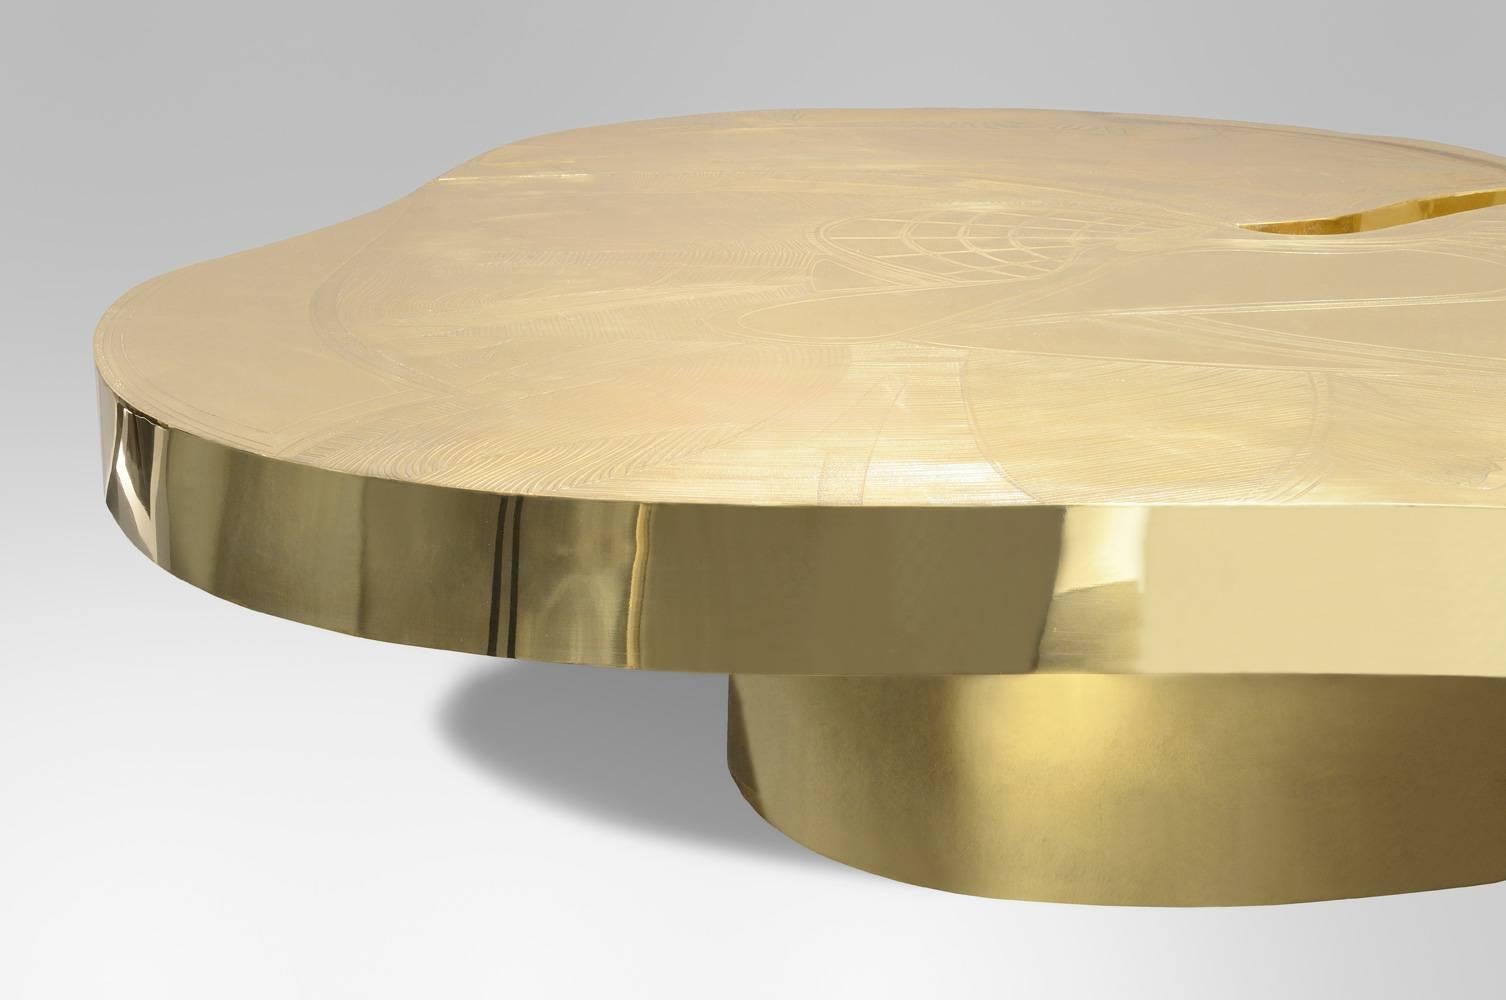 Exceptional coffee table by Armand Jonckers (born in Belgium in 1939),

1979.

Engraved brass.
Unique piece.
Signed Workshop Armand Jonckers and dated 1979.

Diameter 150 cm.